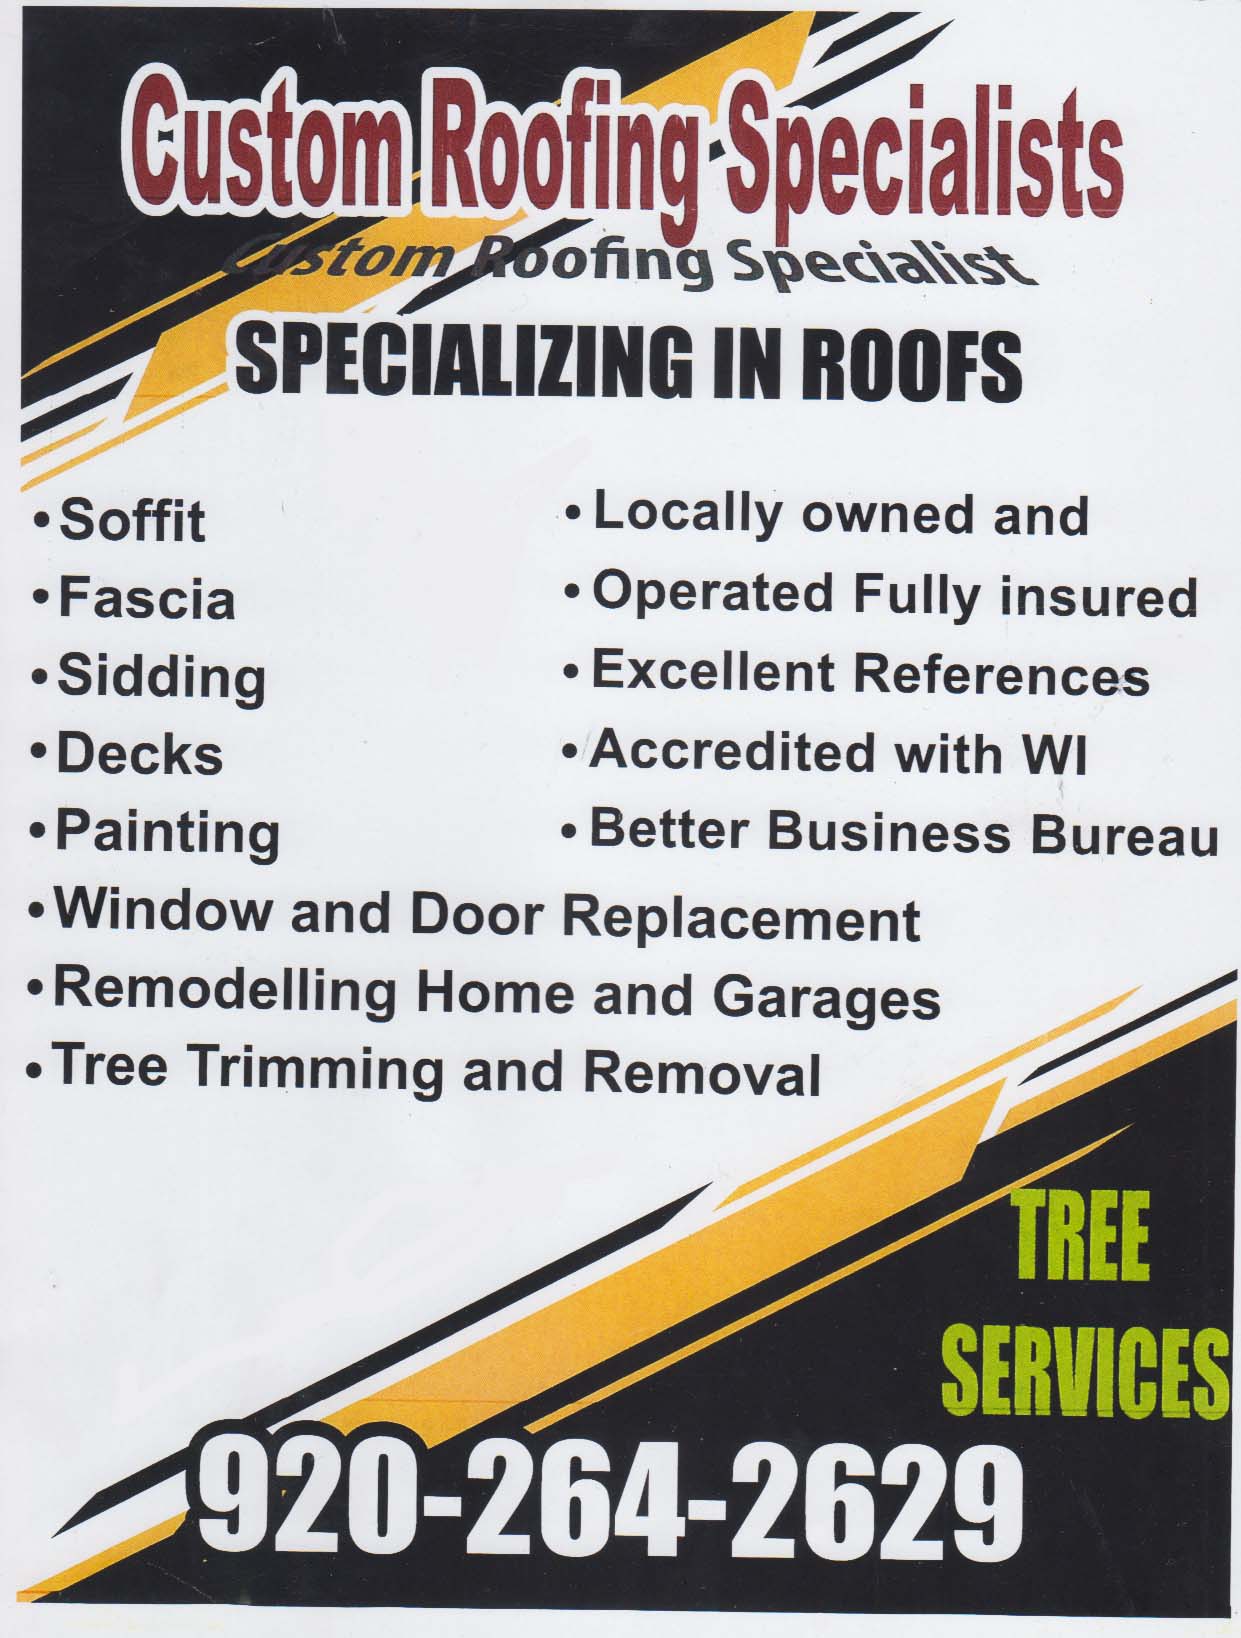 custom roofing services - green bay and fox valley